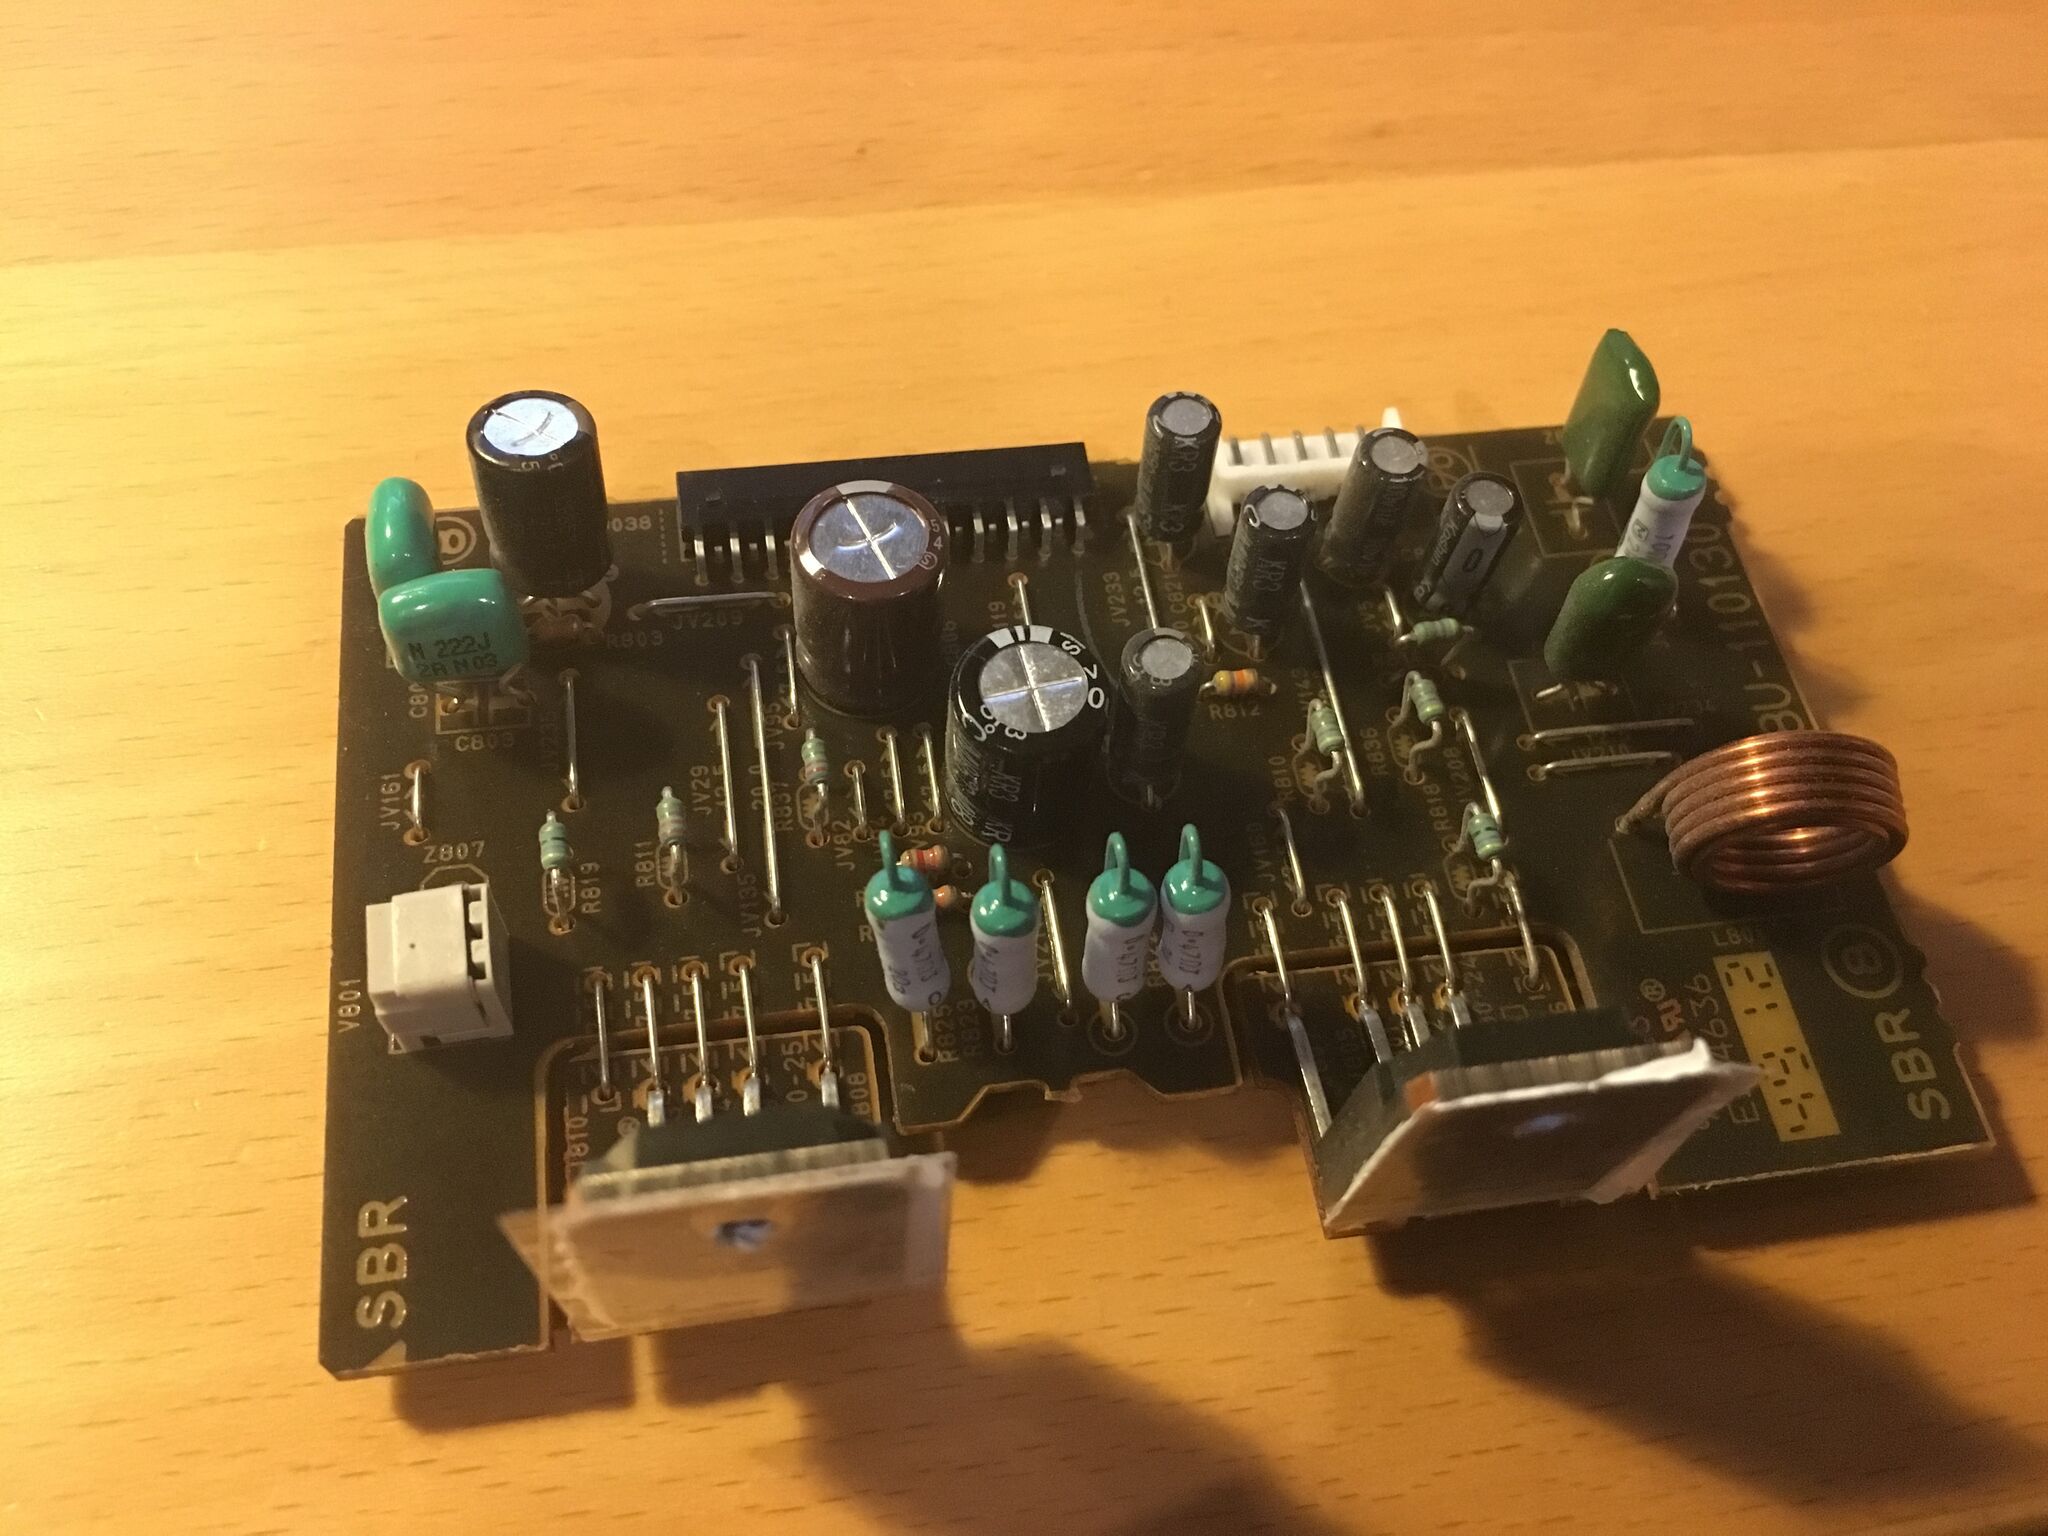 The Surround Back Right amplifier board